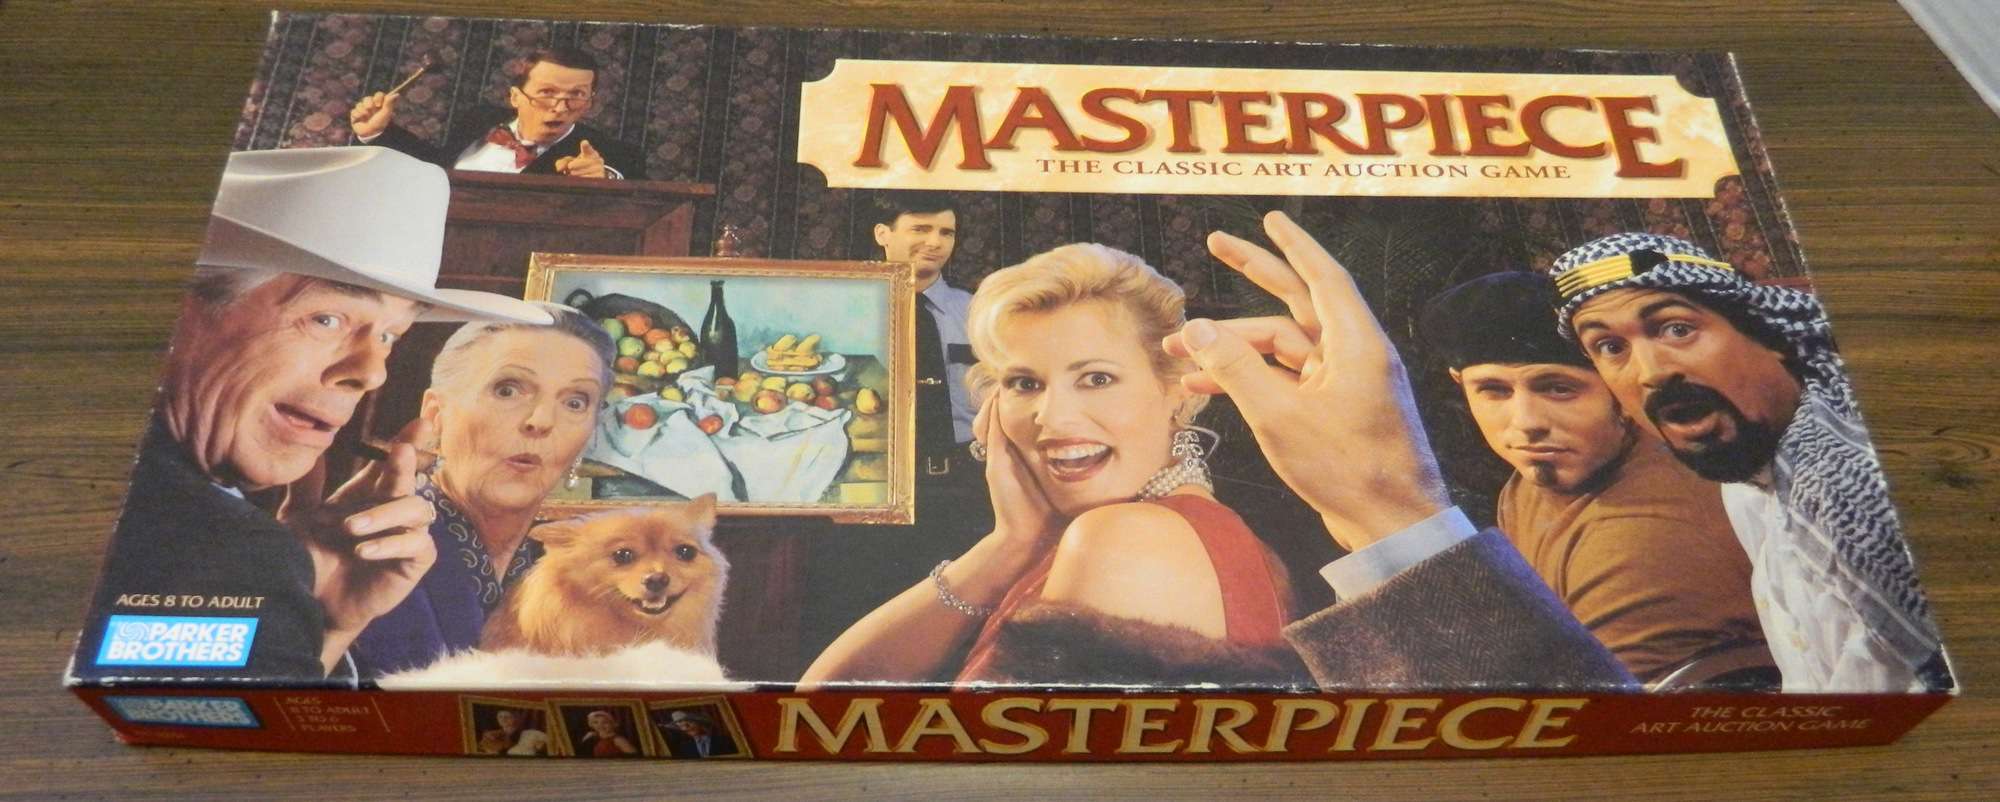 Masterpiece Board Game Review and Rules